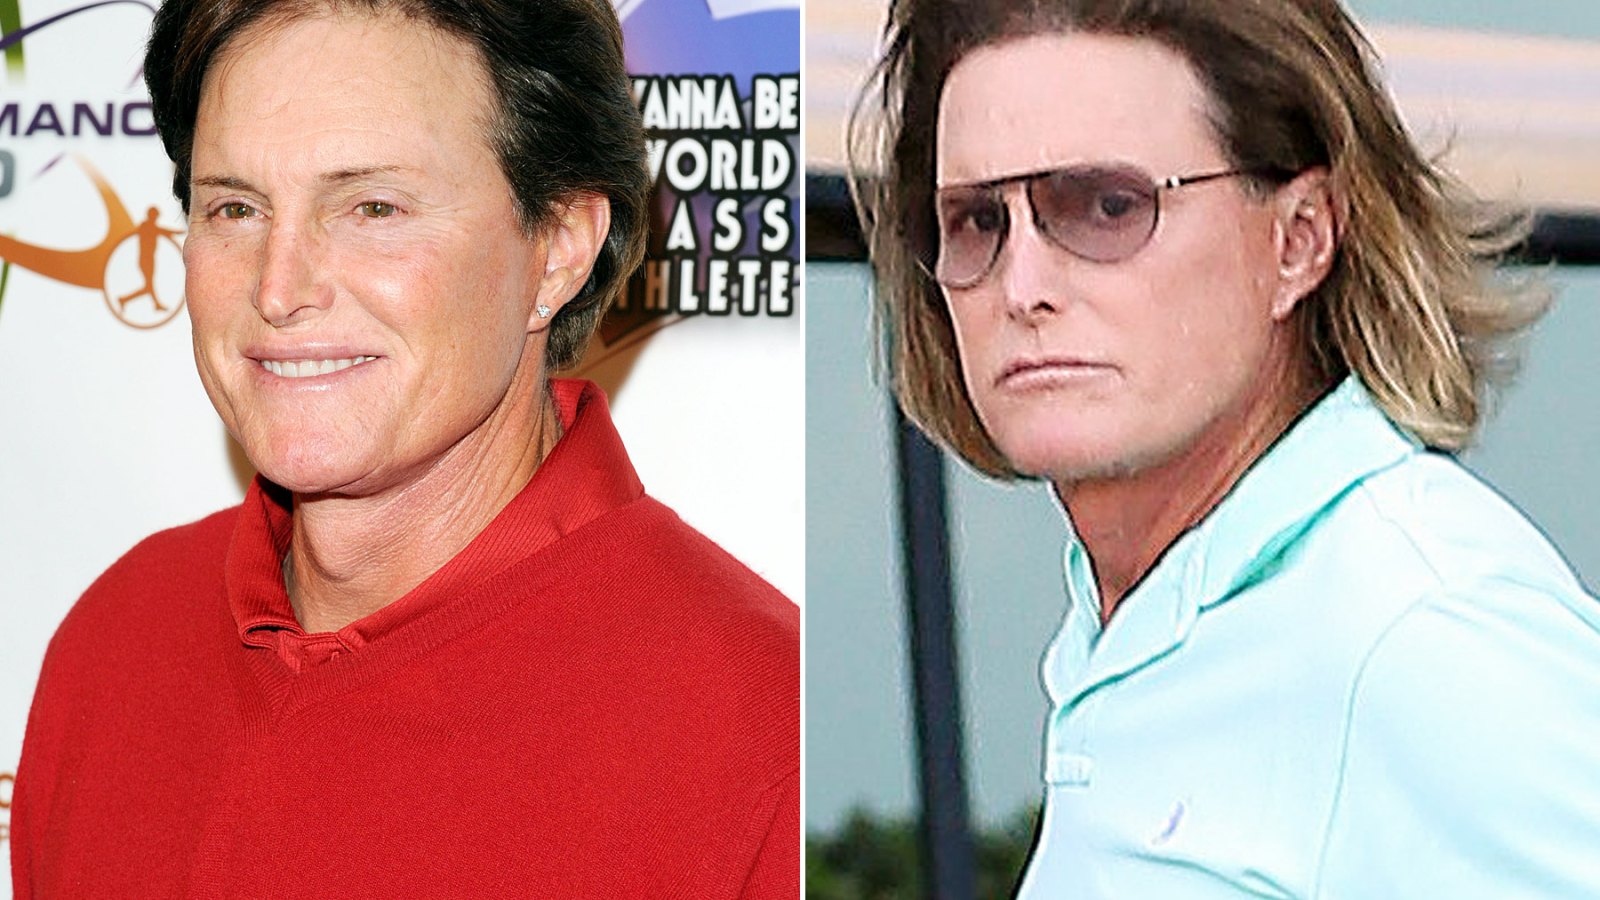 Bruce Jenner on Jan. 23, 2013 and on Feb. 10, 2014